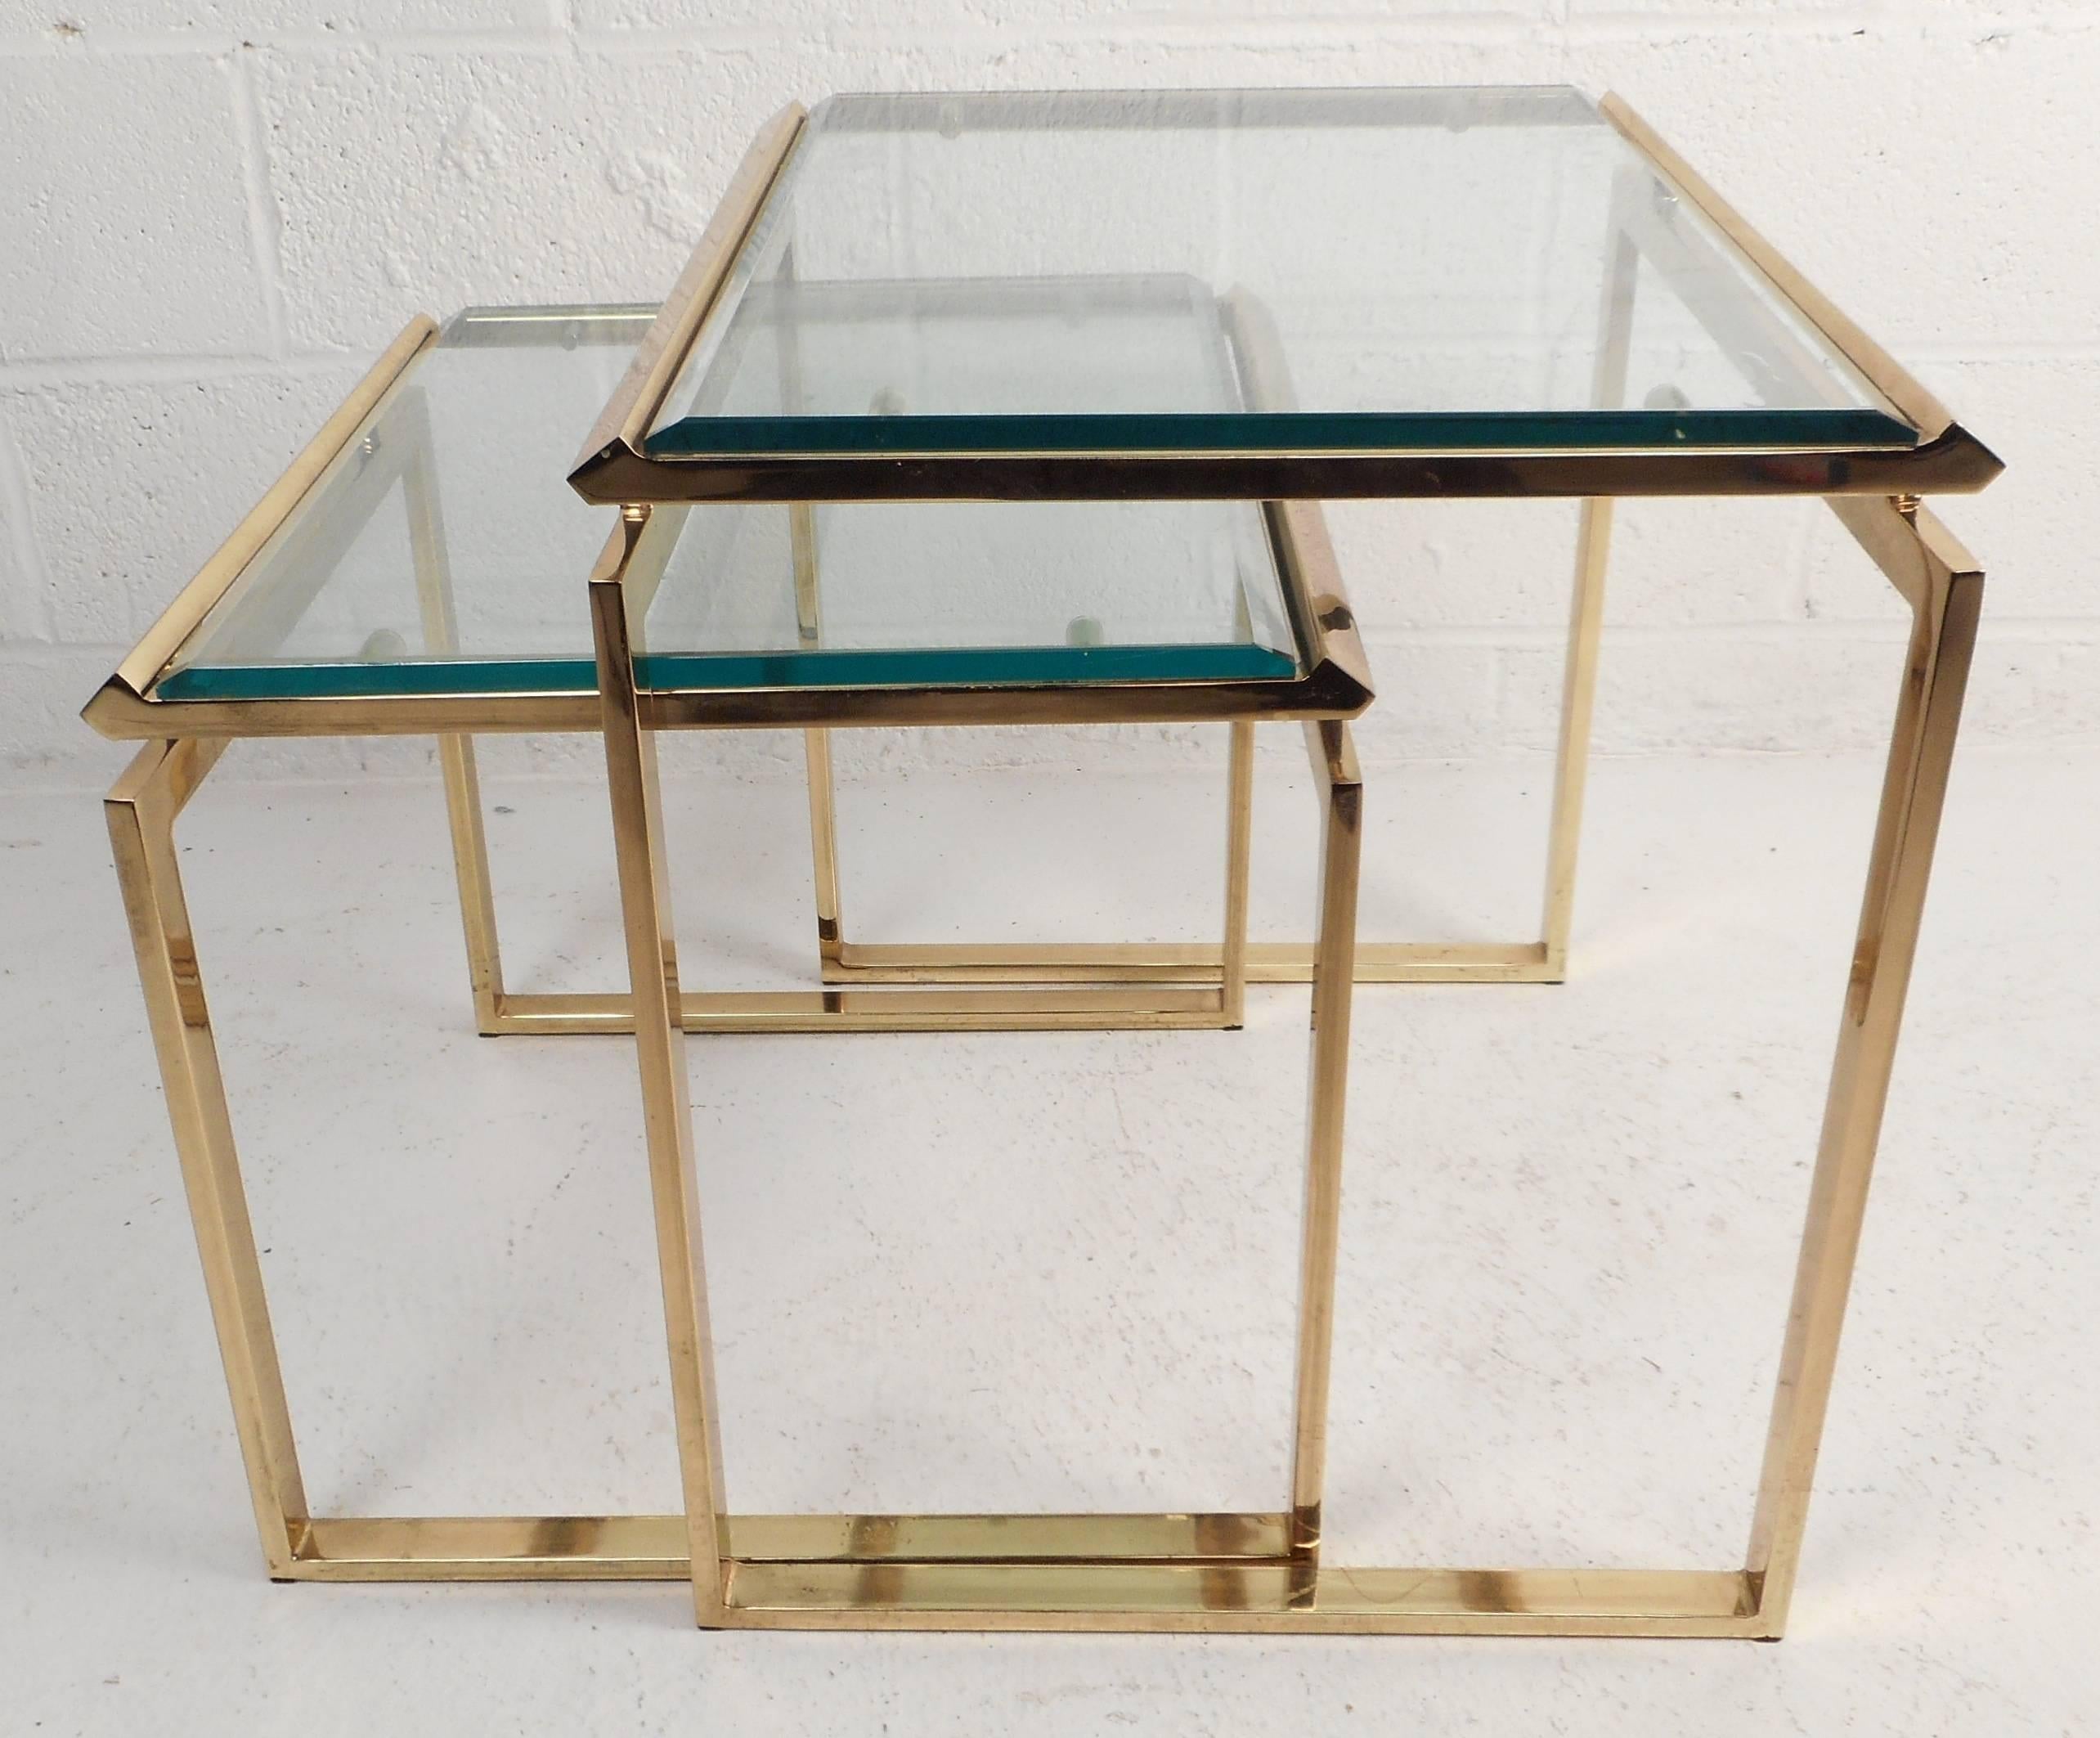 Gorgeous pair of vintage modern nesting tables feature unique beveled glass and brass edges. The thick green glass sits comfortably on top of the solid brass frame. The sleek design has a floating top and sled legs showing quality craftsmanship.